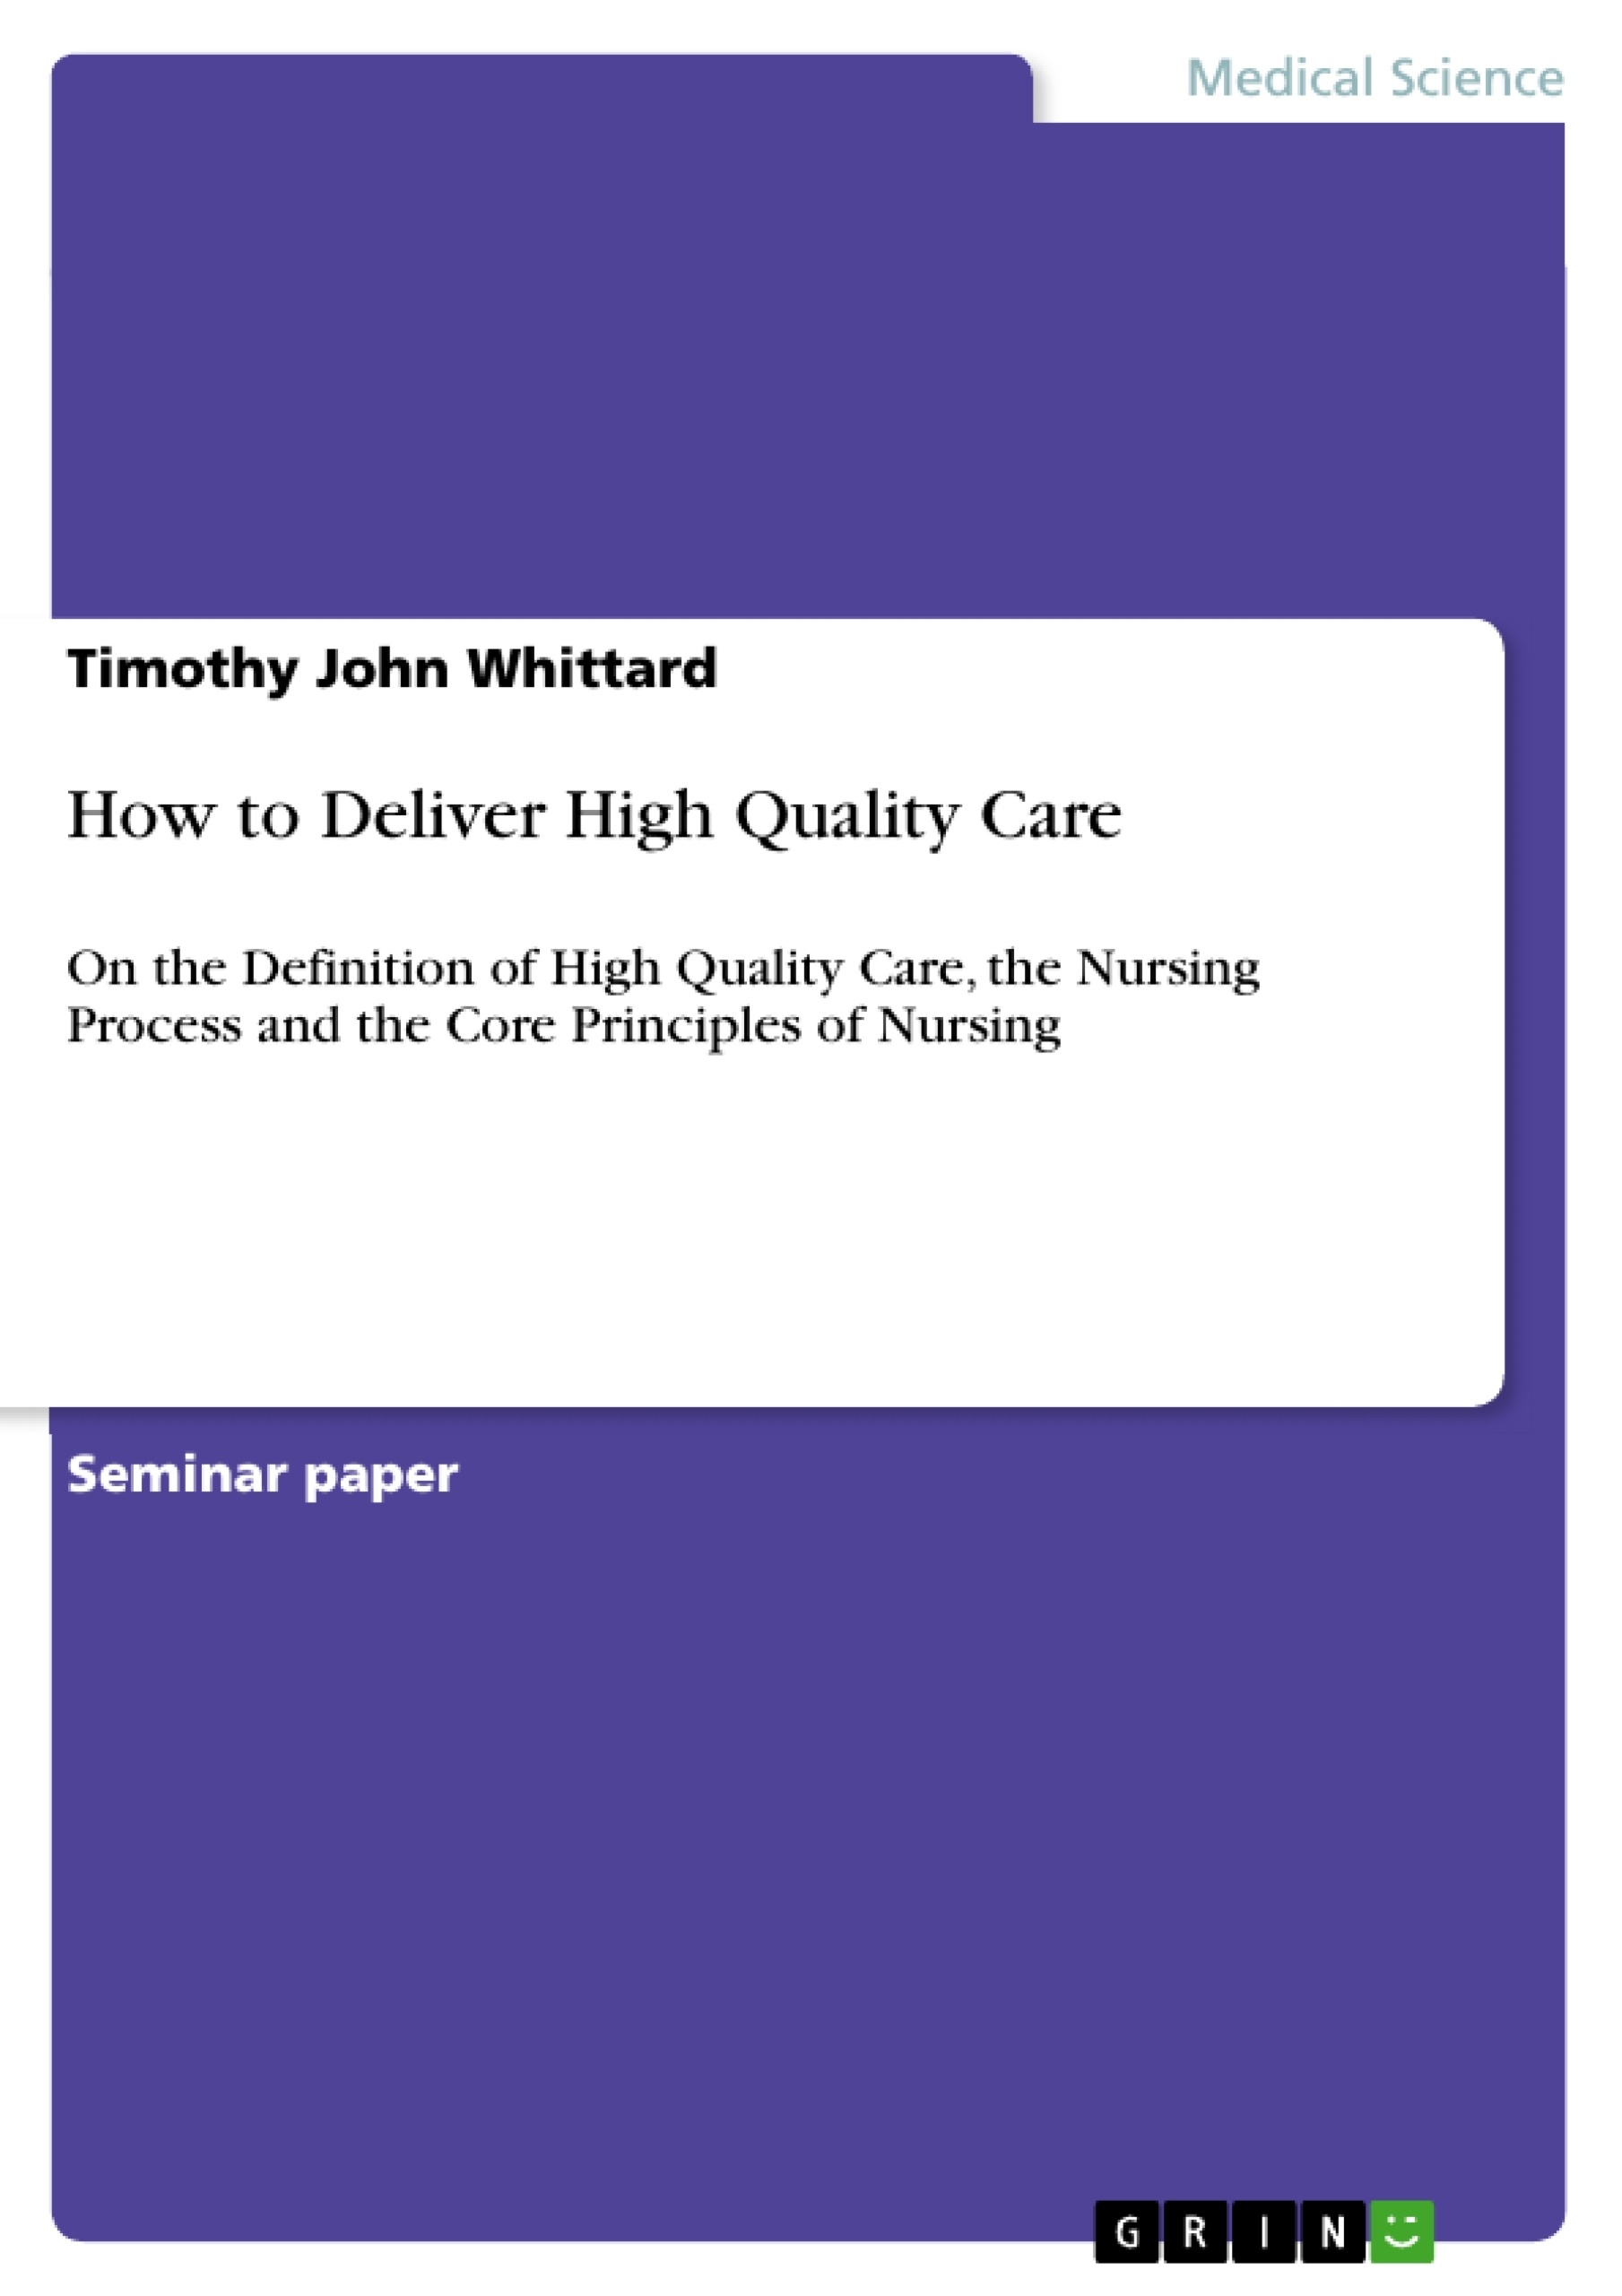 Titel: How to Deliver High Quality Care